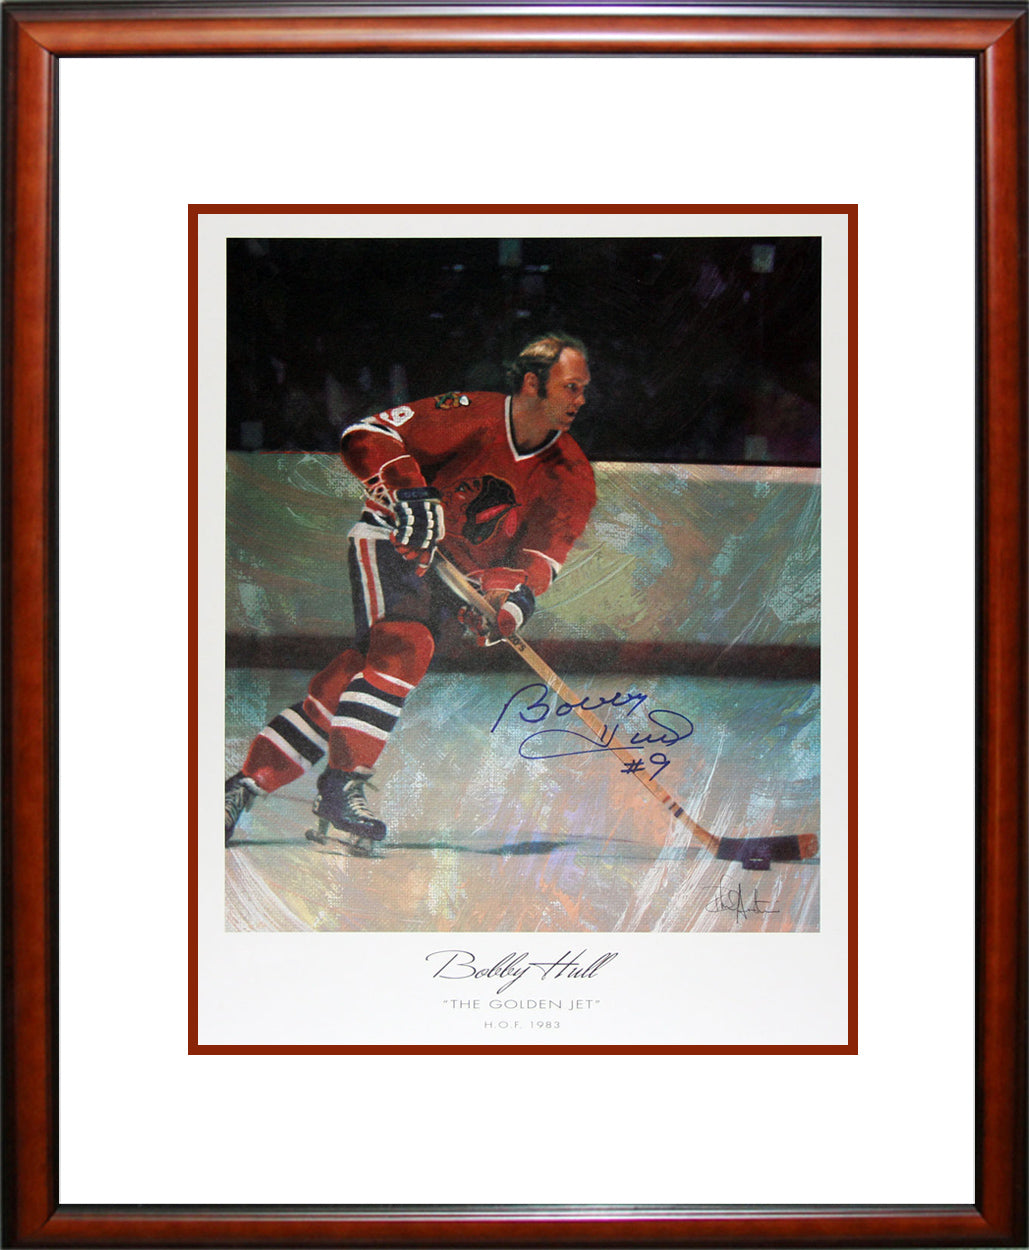 The Golden Jet Autographed Framed Lithograph - Bobby Hull Chicago Blackhawks, Chicago Blackhawks, NHL, Hockey, Autographed, Signed, AACMH30452